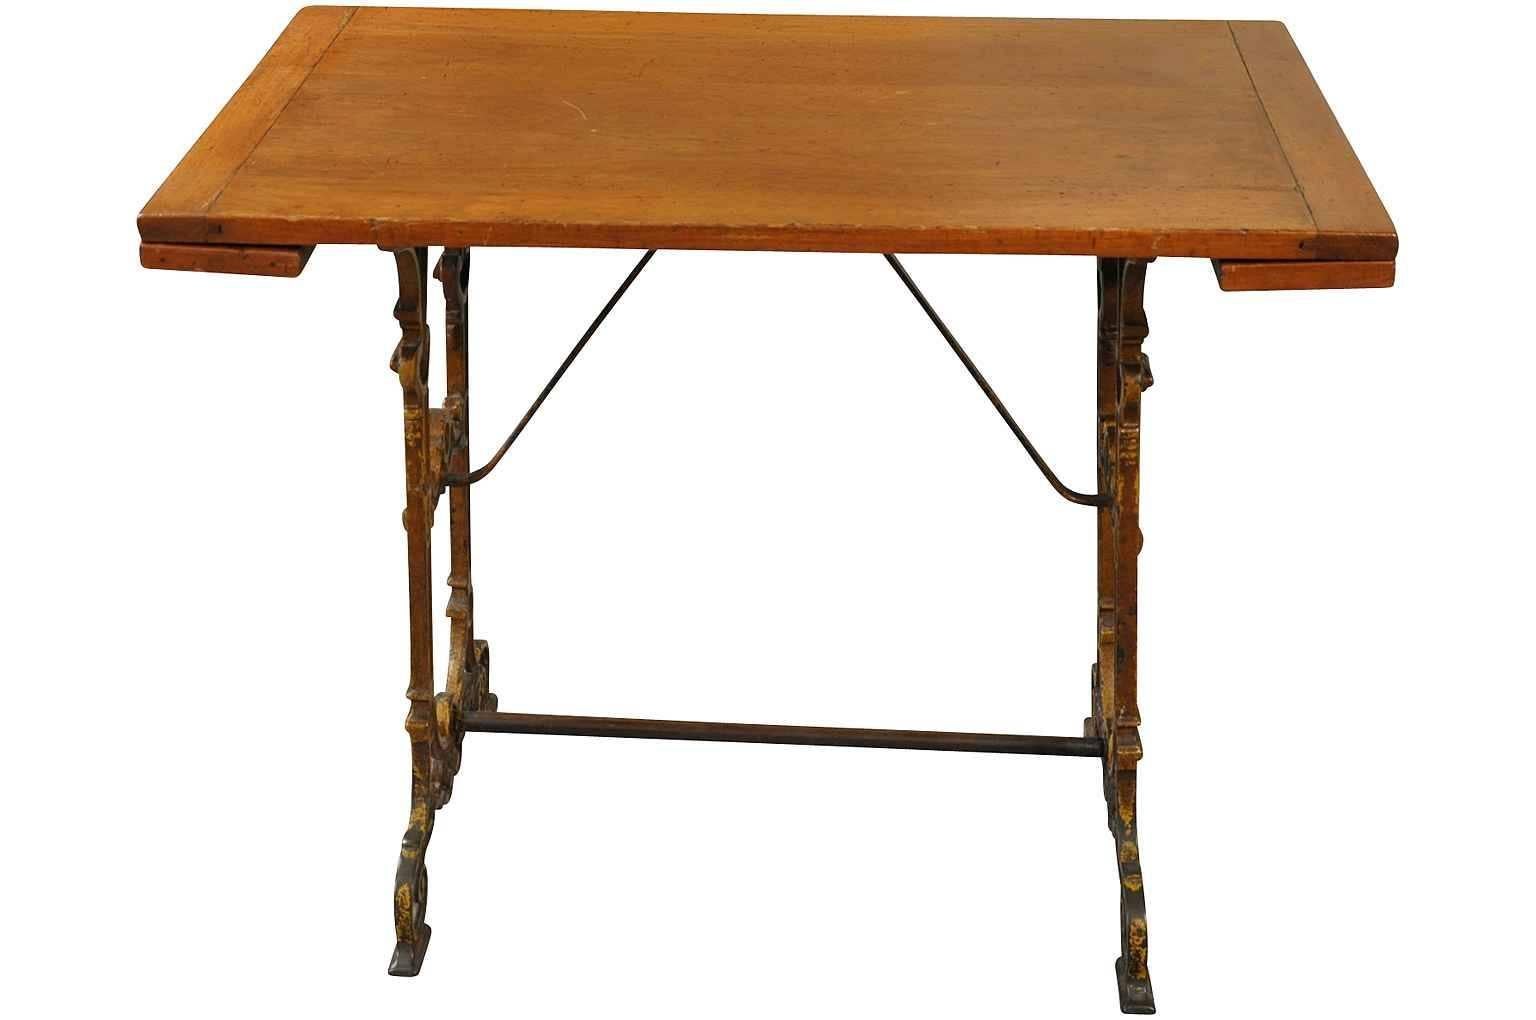 A charming late 19th century French Bistro table constructed with a very handsome cast iron case with a wooded top. The wooden top extends from both ends. With both extensions opened, the width is 45 3/8